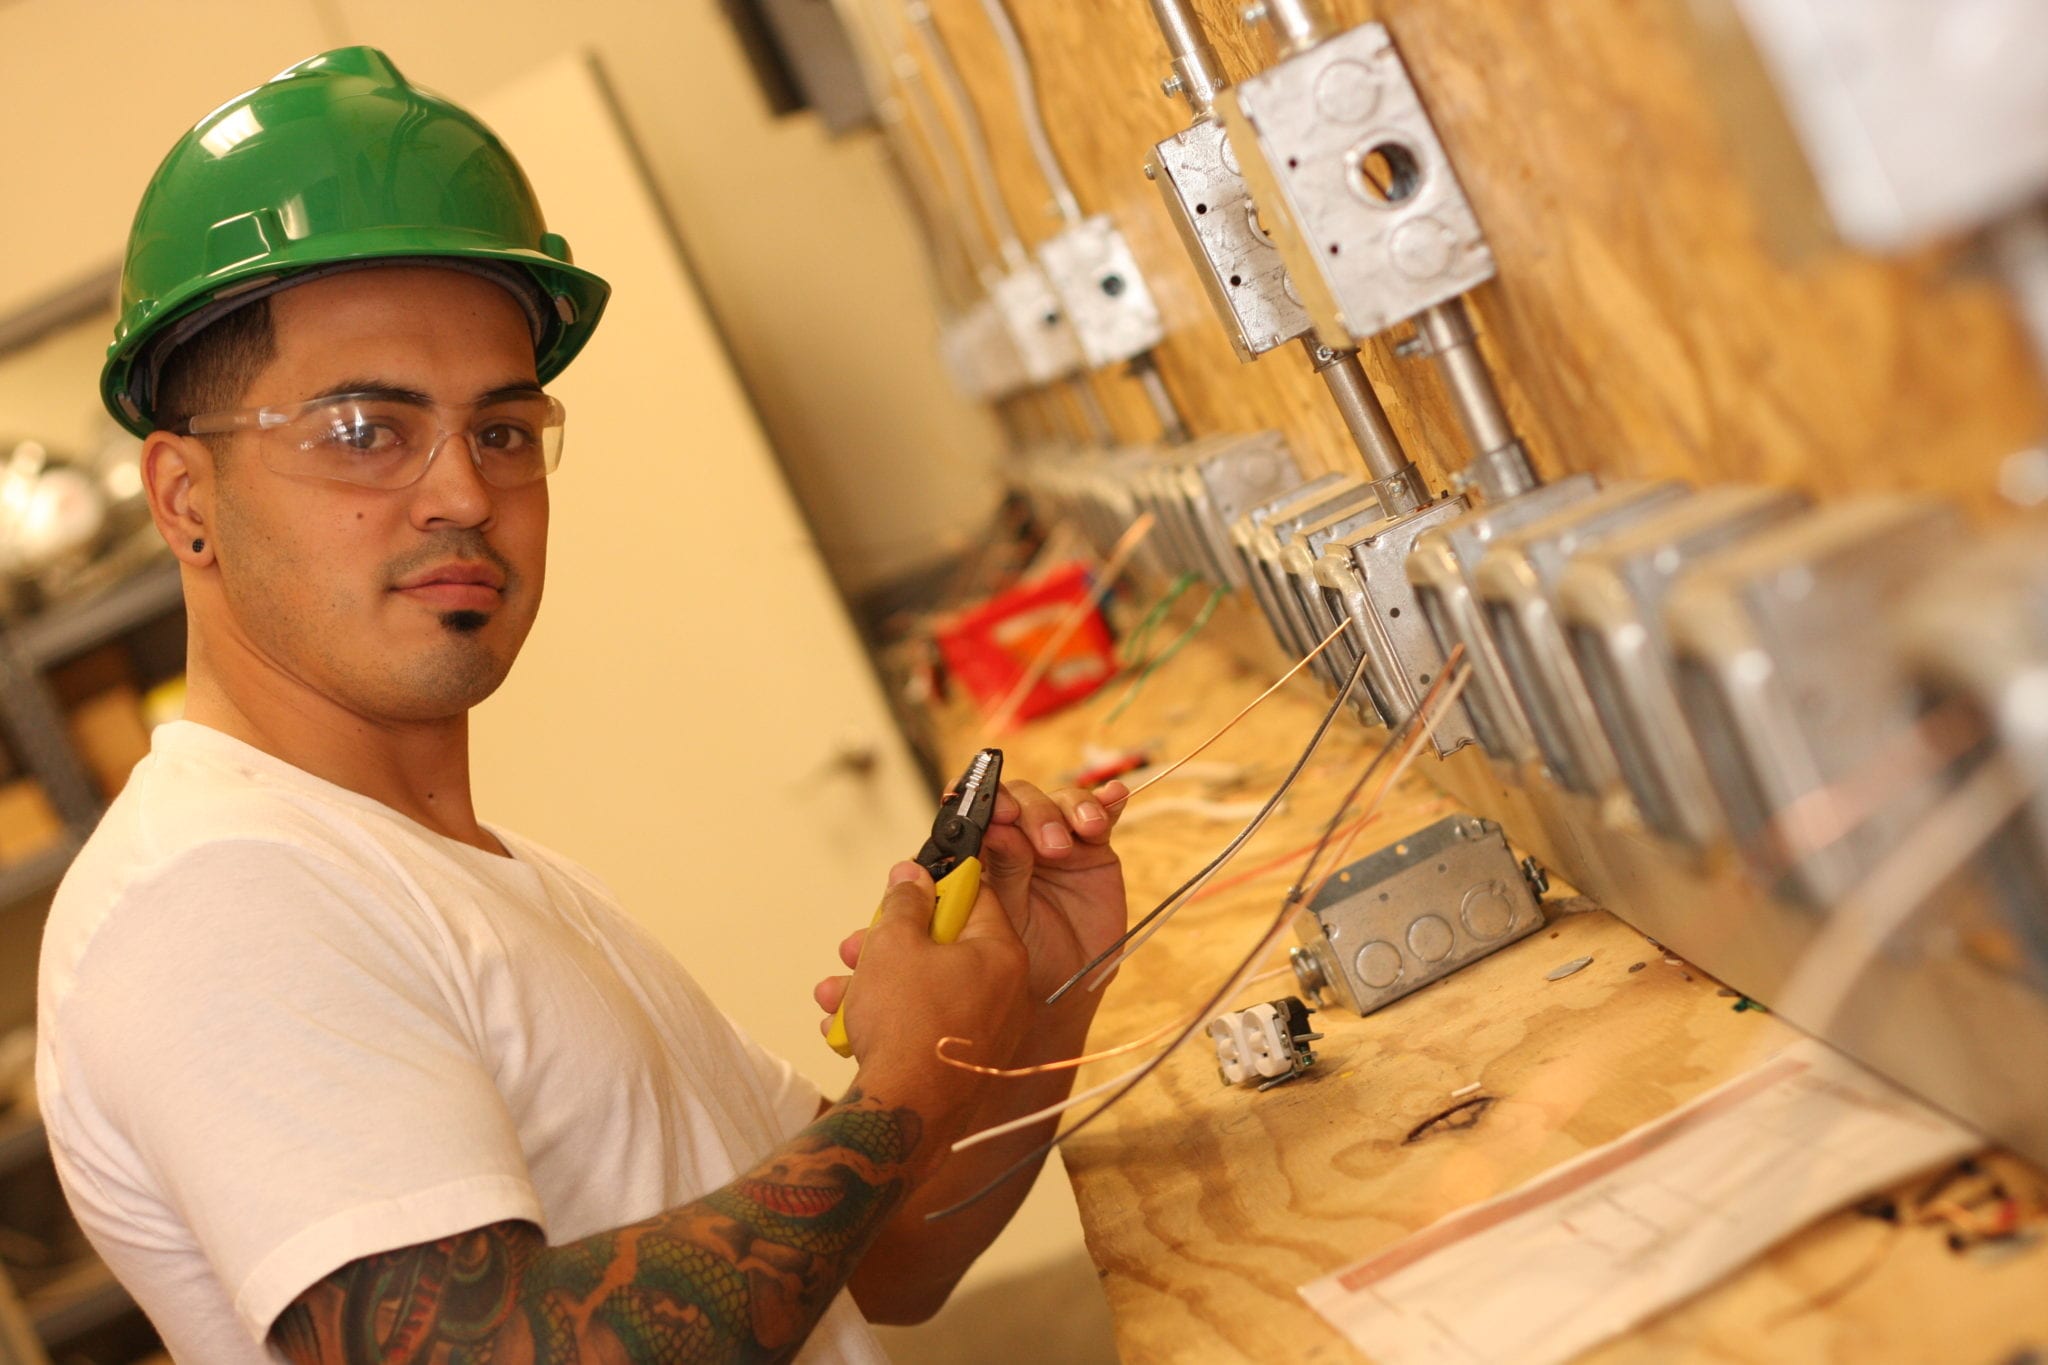 5 Myths About Working as an Electrician